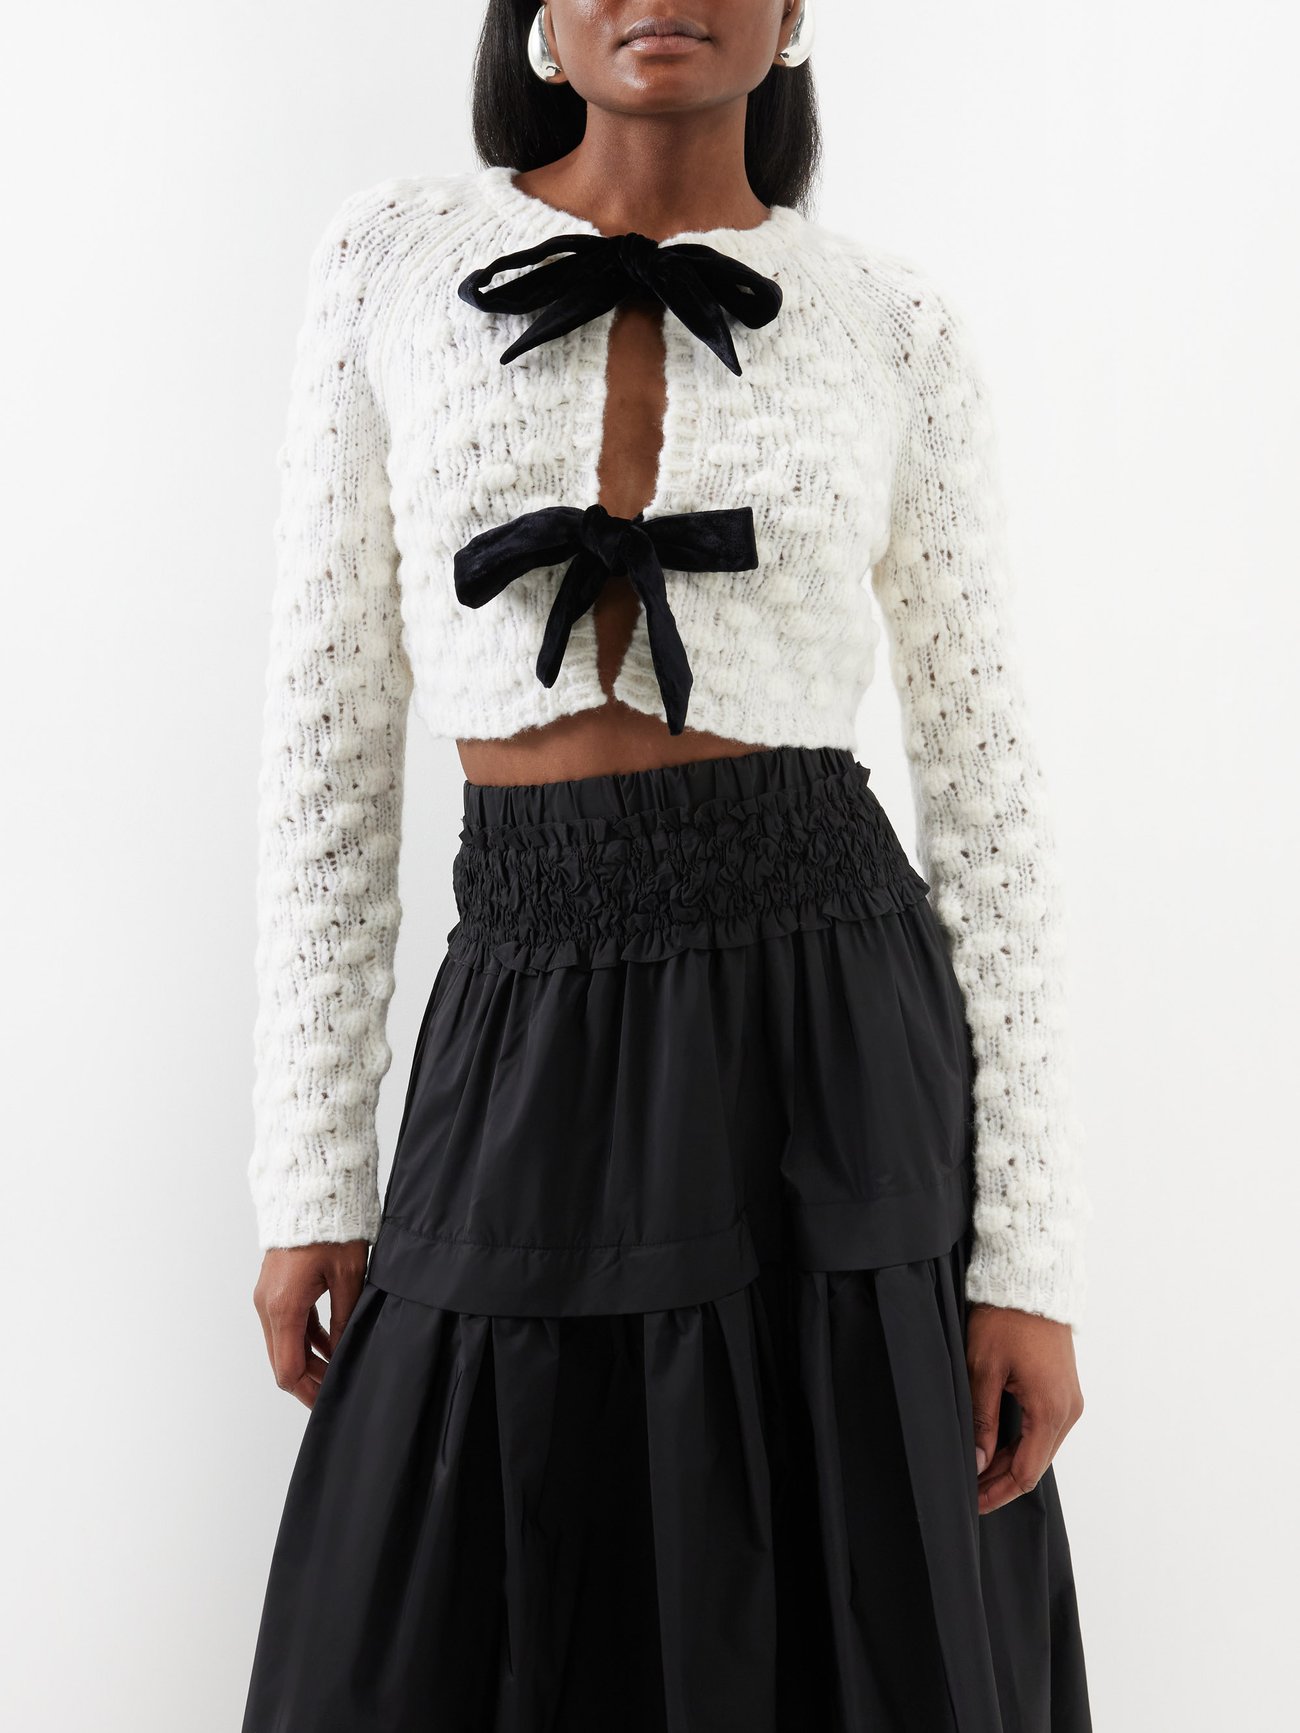 Notes of romance permeate Sea's white Teresa cropped cardigan, knitted from a soft wool blend and accented with a pair of black velvet bow ties.